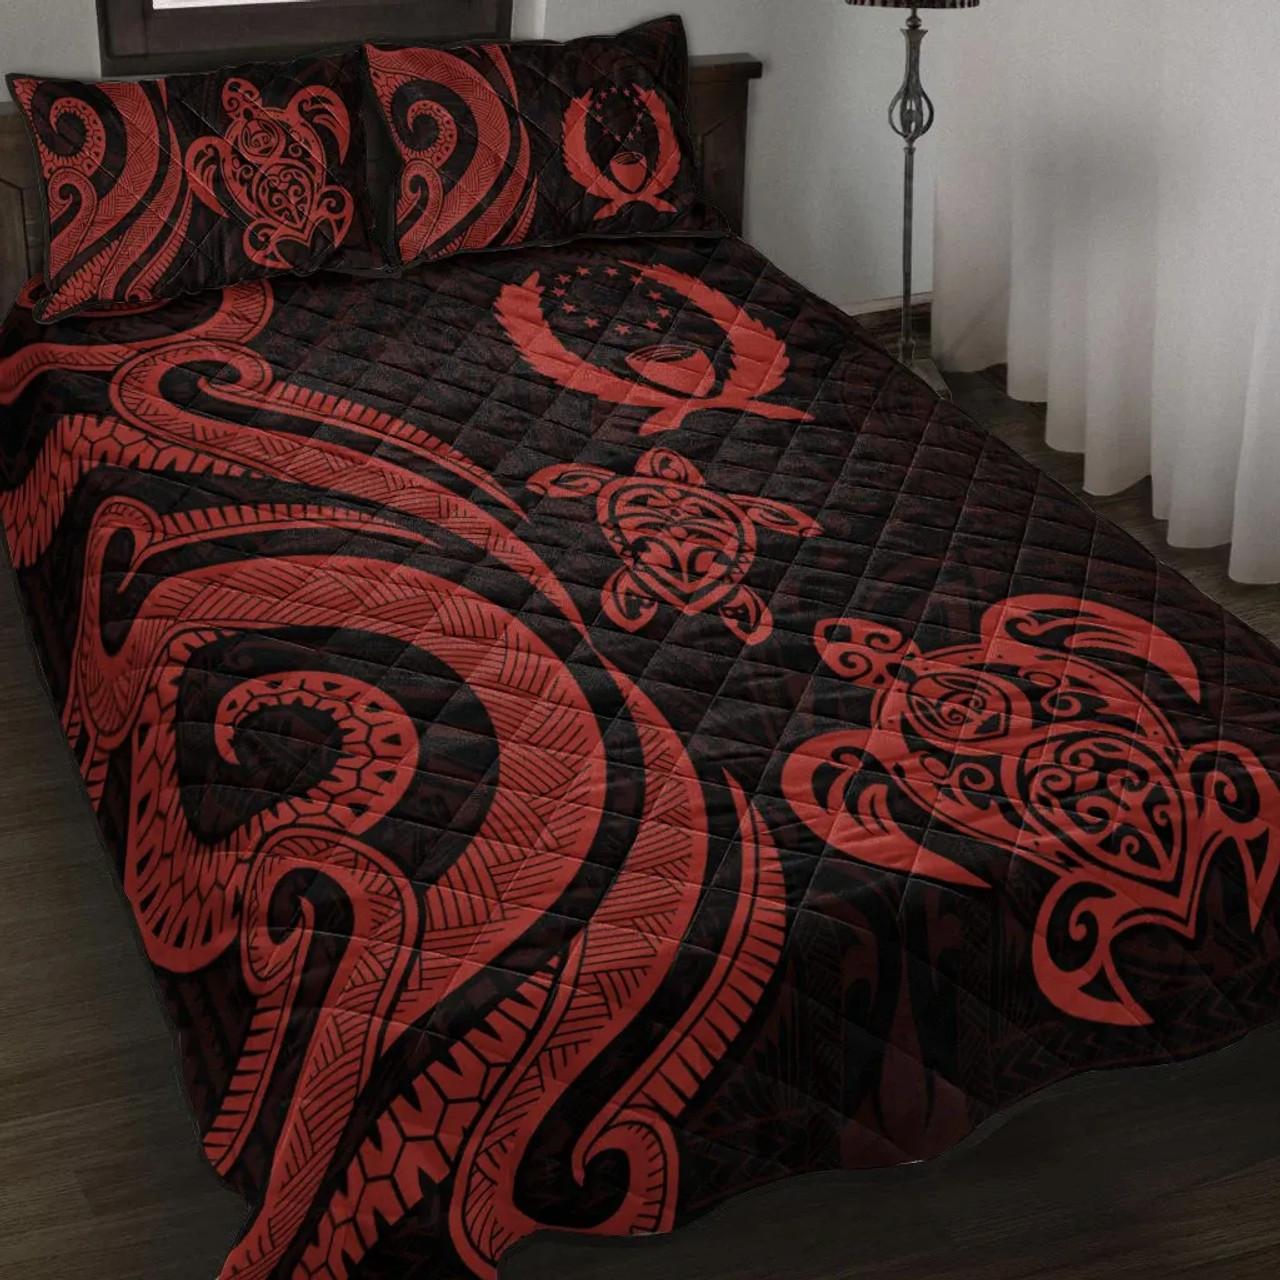 Pohnpei Quilt Bed Set - Red Tentacle Turtle 1